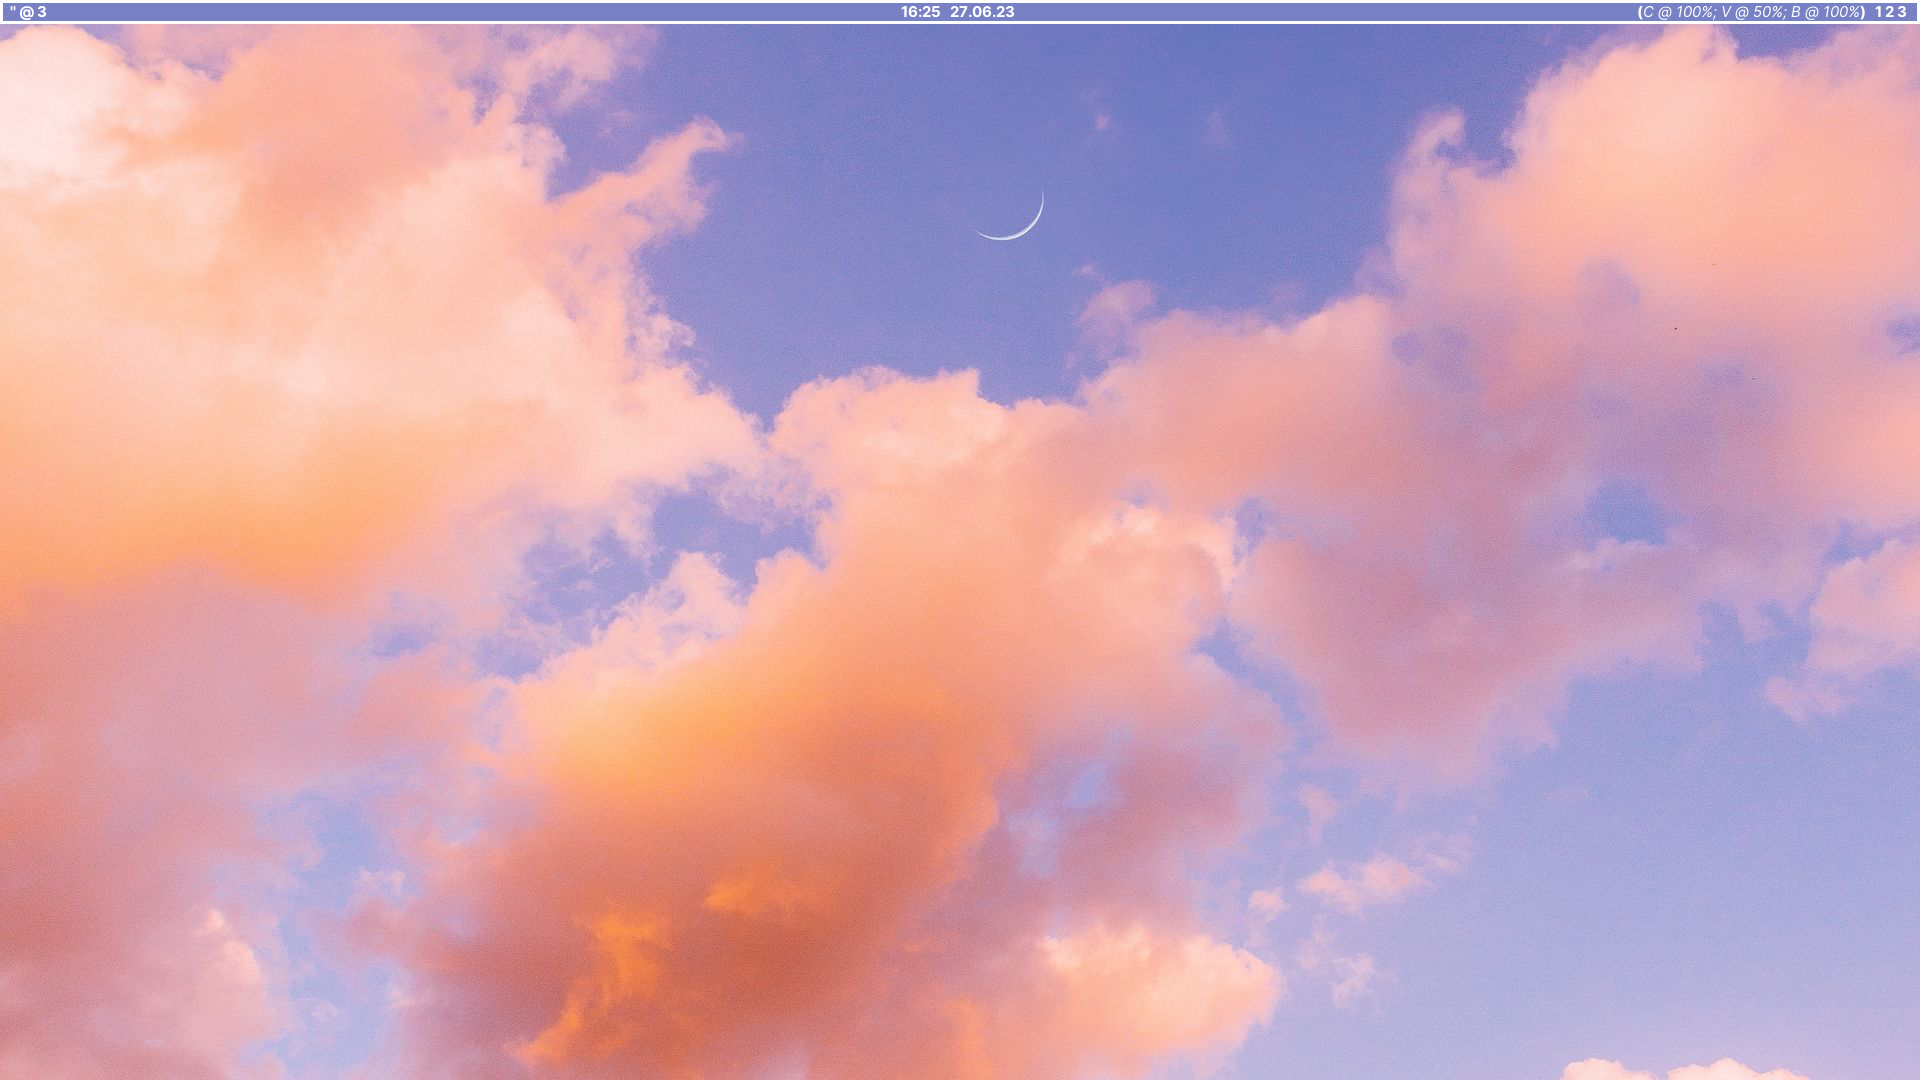 my laptop wallpaper. pink-orange clouds on a blue sky. a moon in the center. along the top of the screen, there's a pale blue status bar